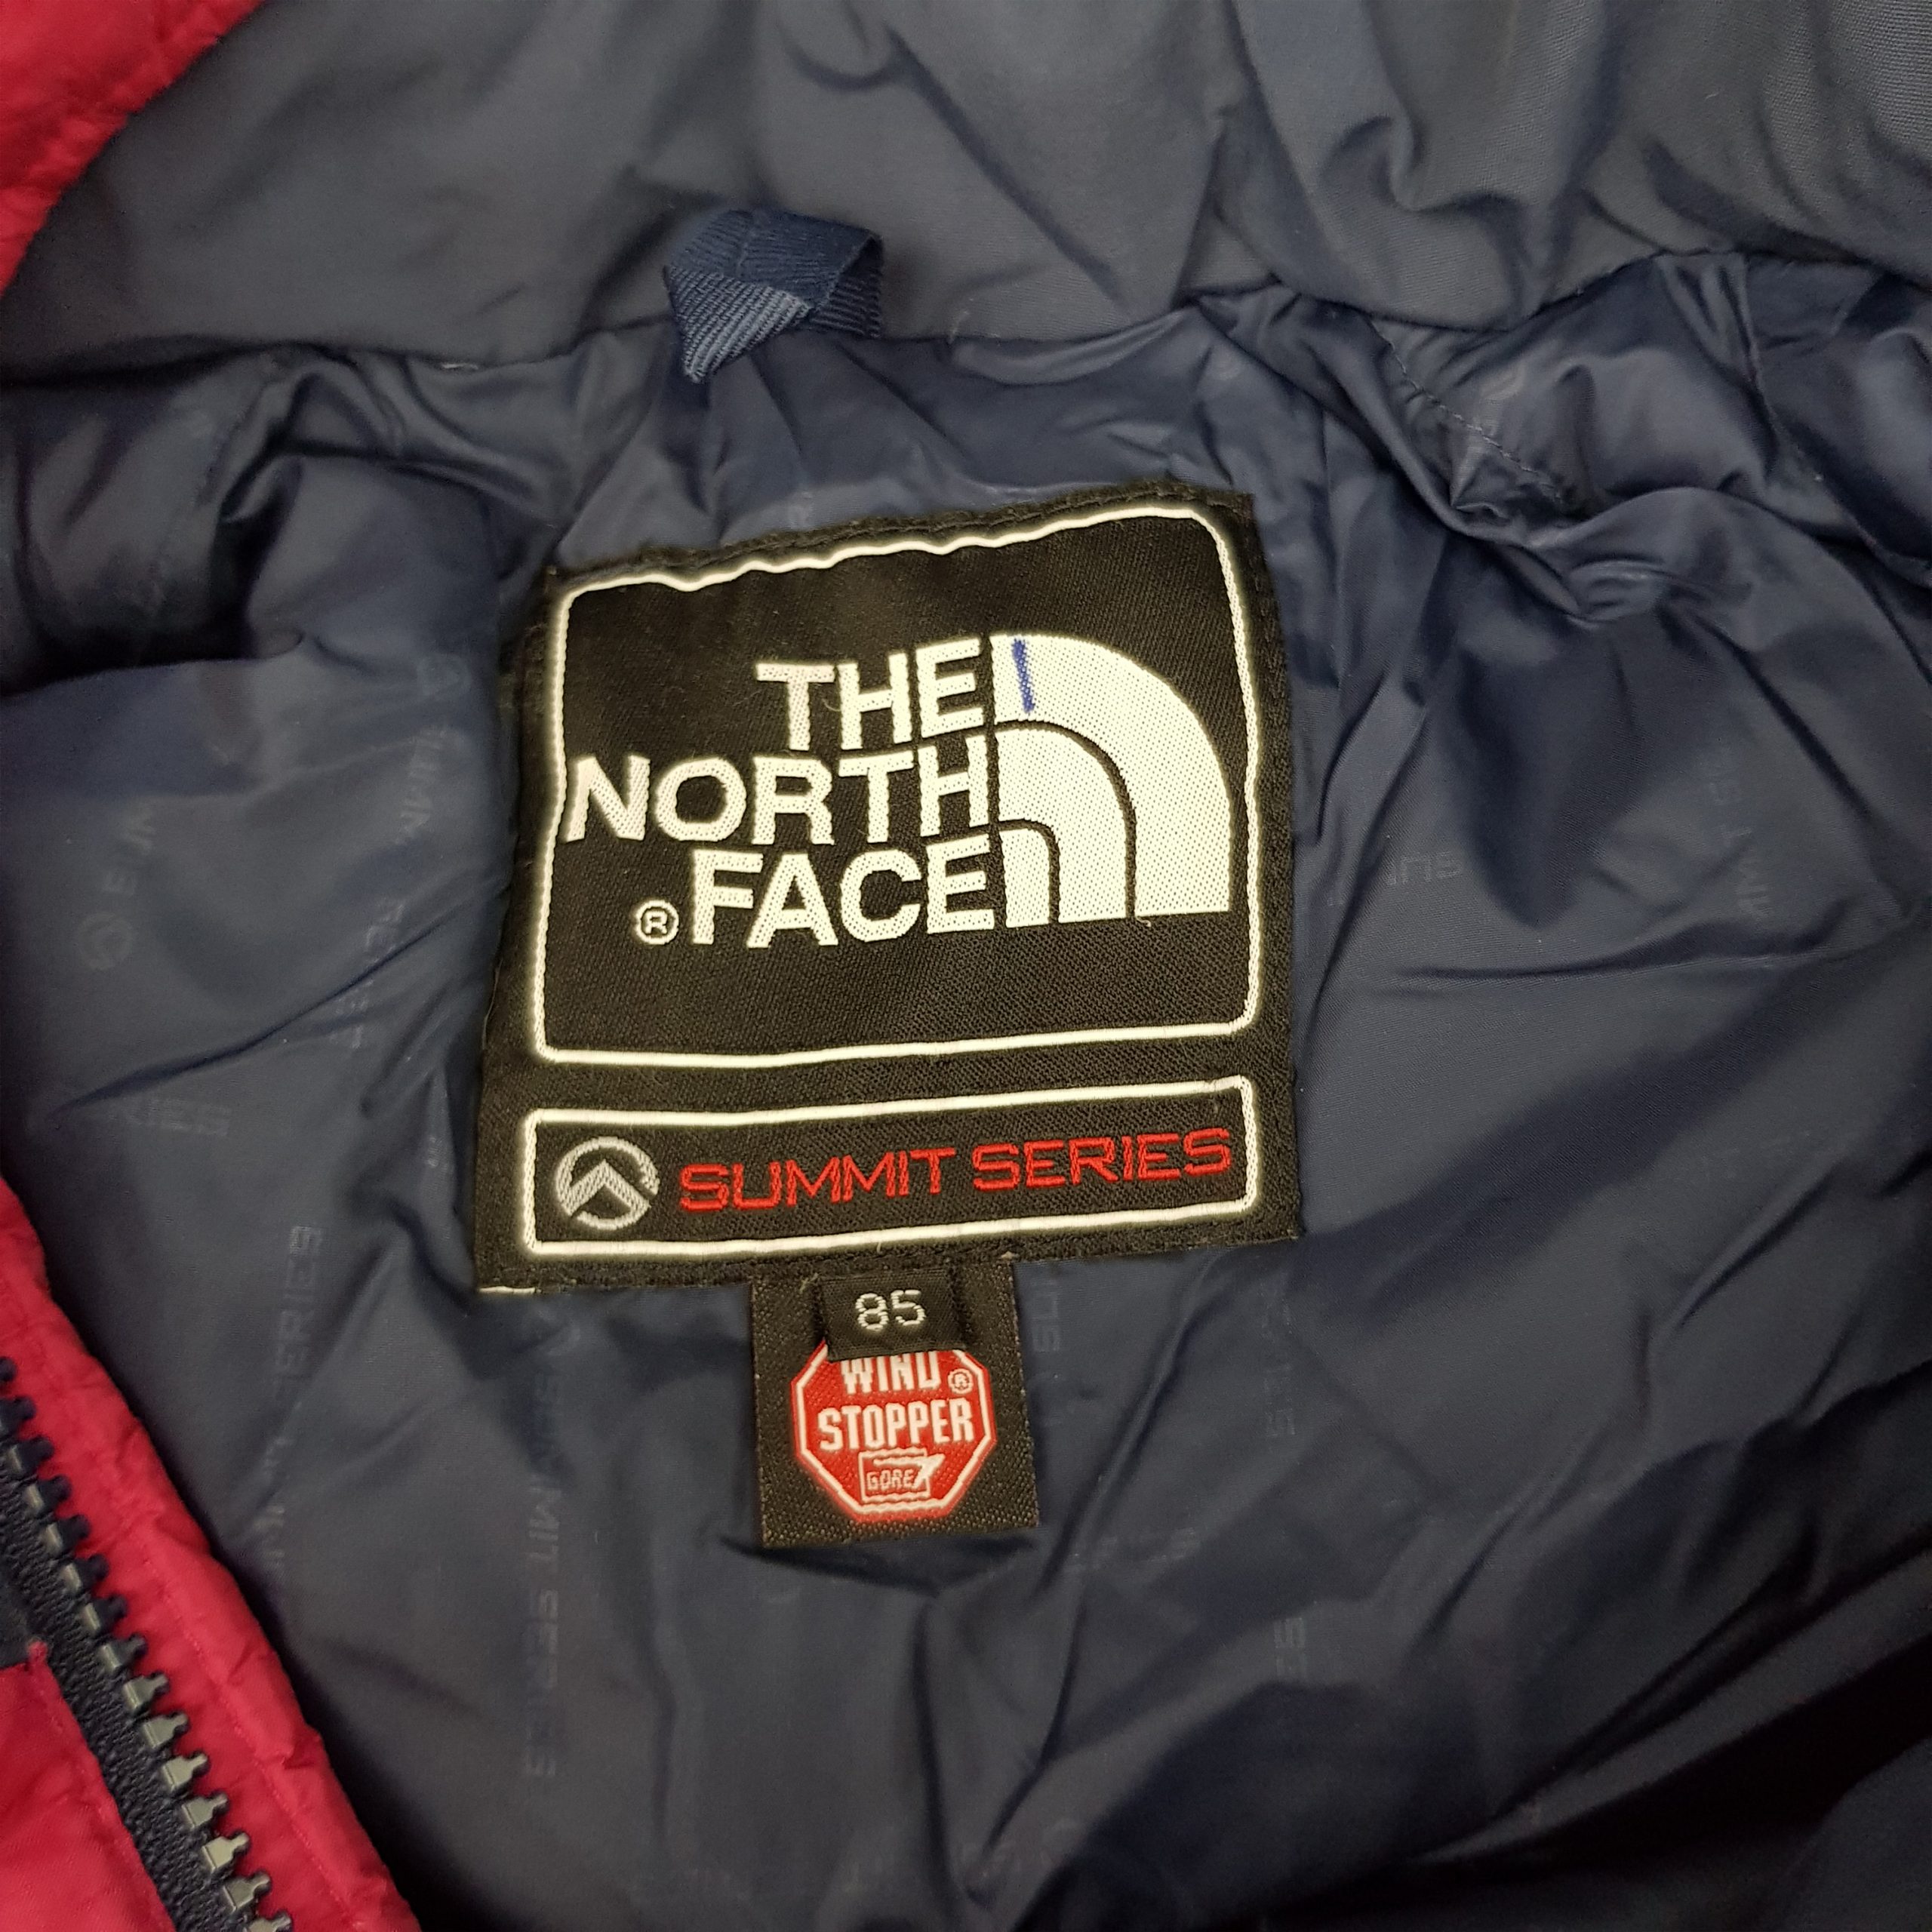 The North Face Summit Series Windstopper Parka 700